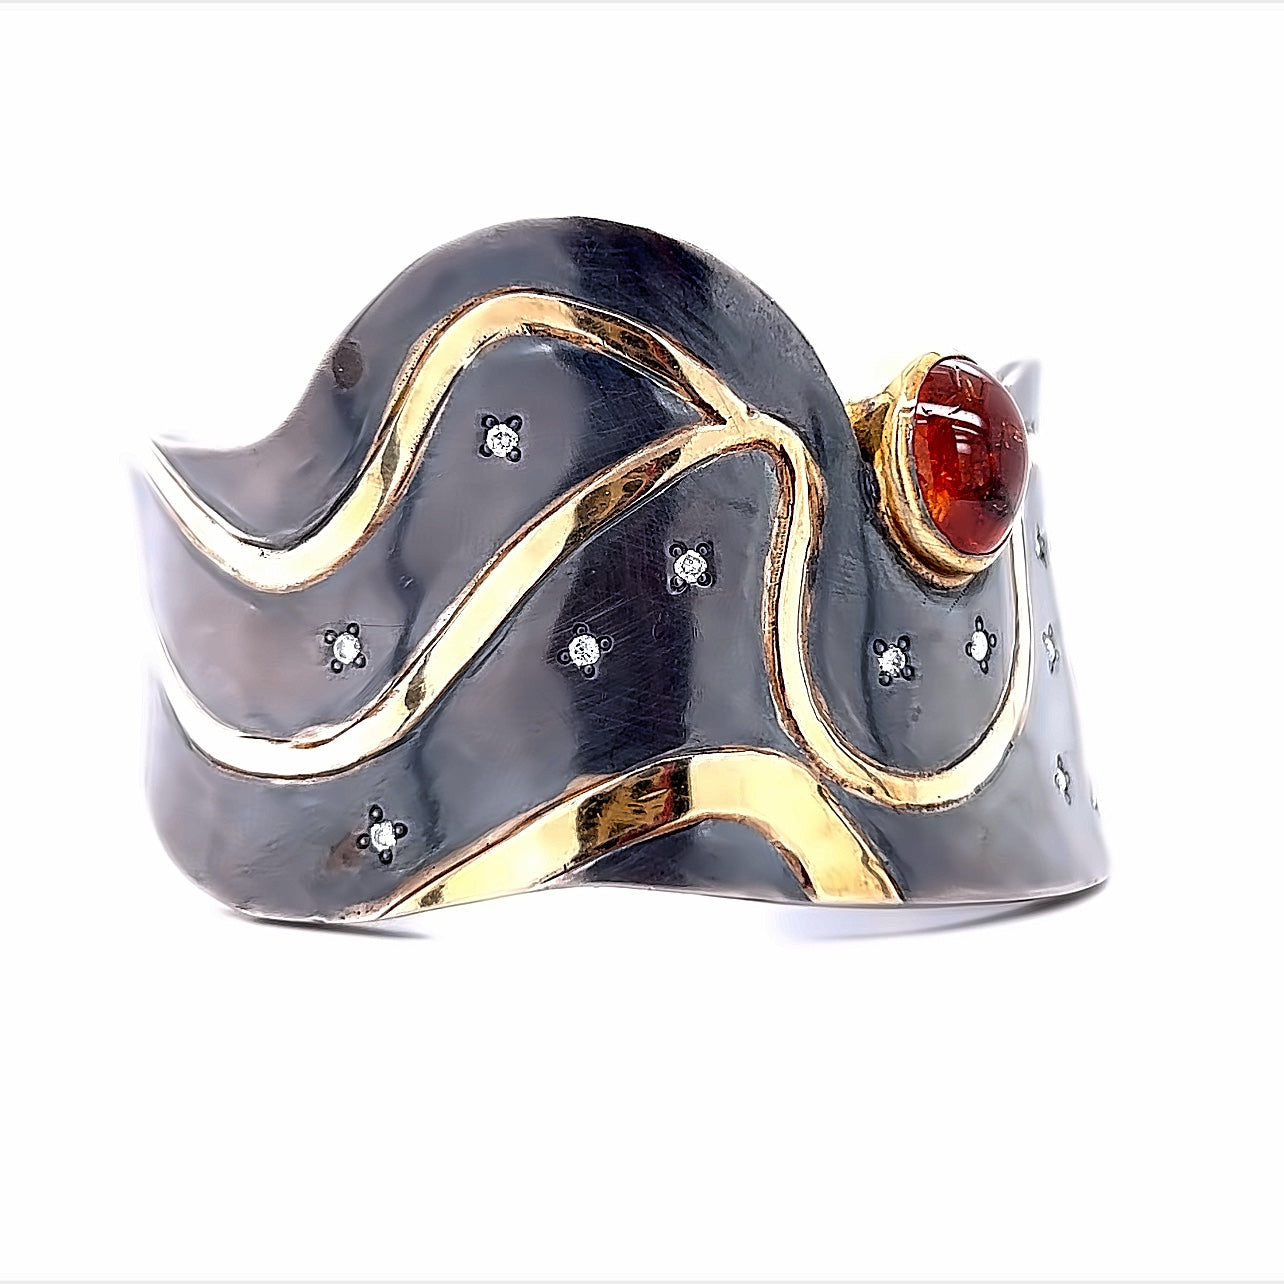 Oxidized Sterling Silver and 18k Yellow Gold Garnet Pathways Bracelet by Paul Richter (9.81ct.)